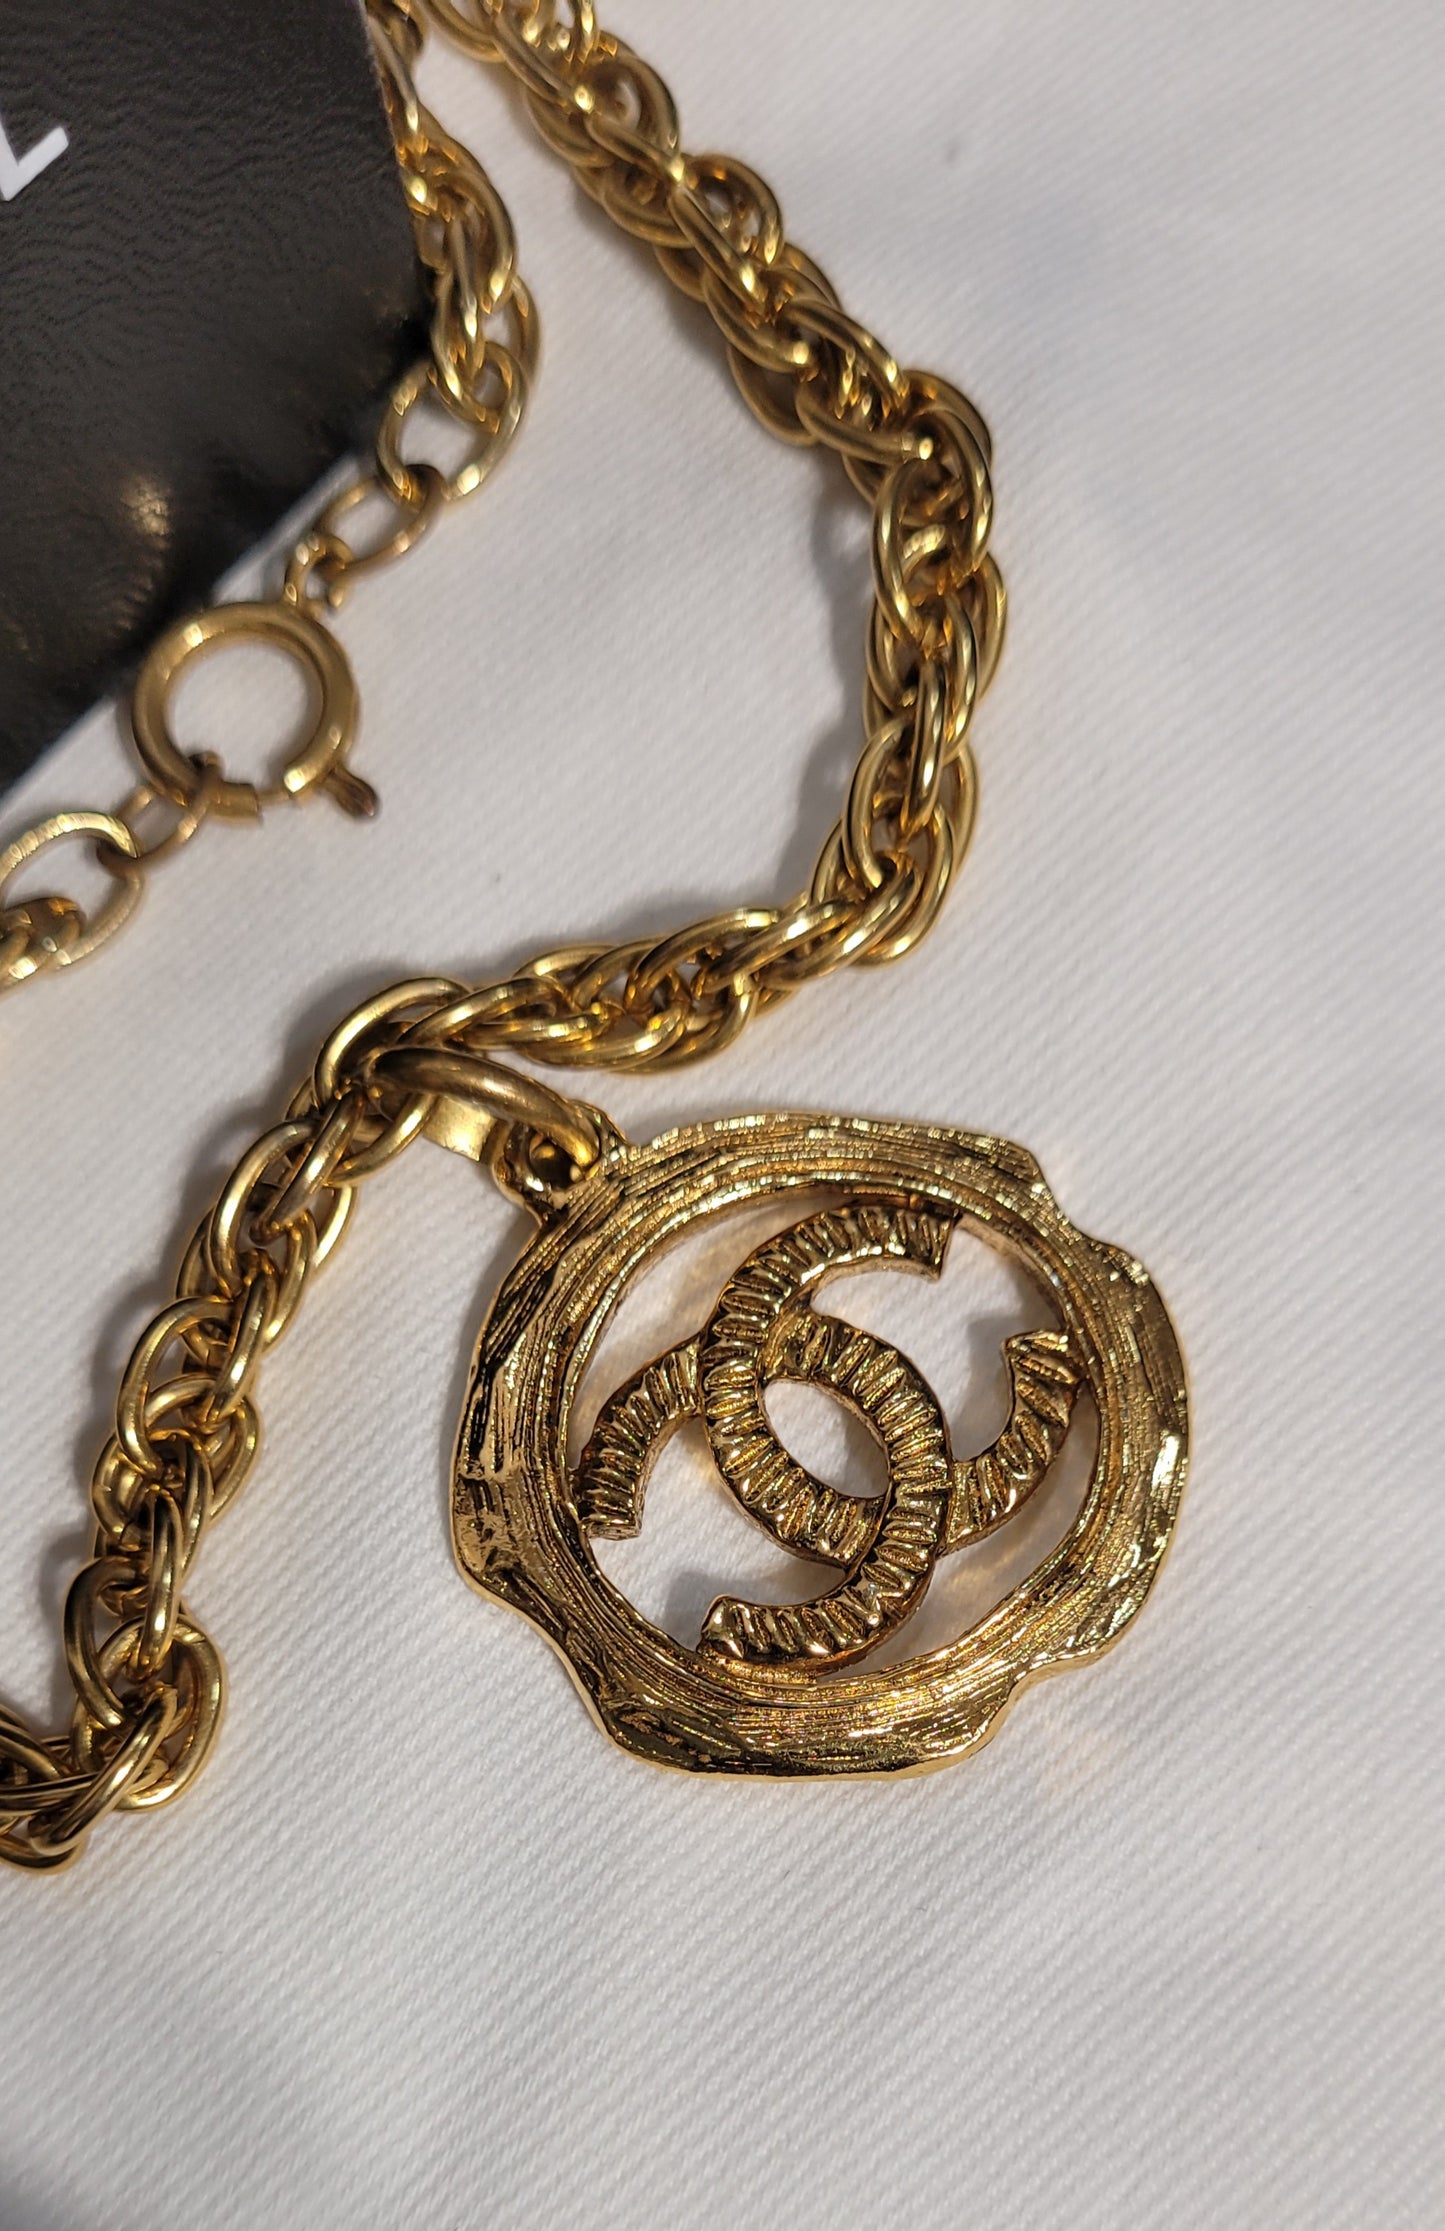 Preowned Vintage Chanel 24k gold plated Necklace